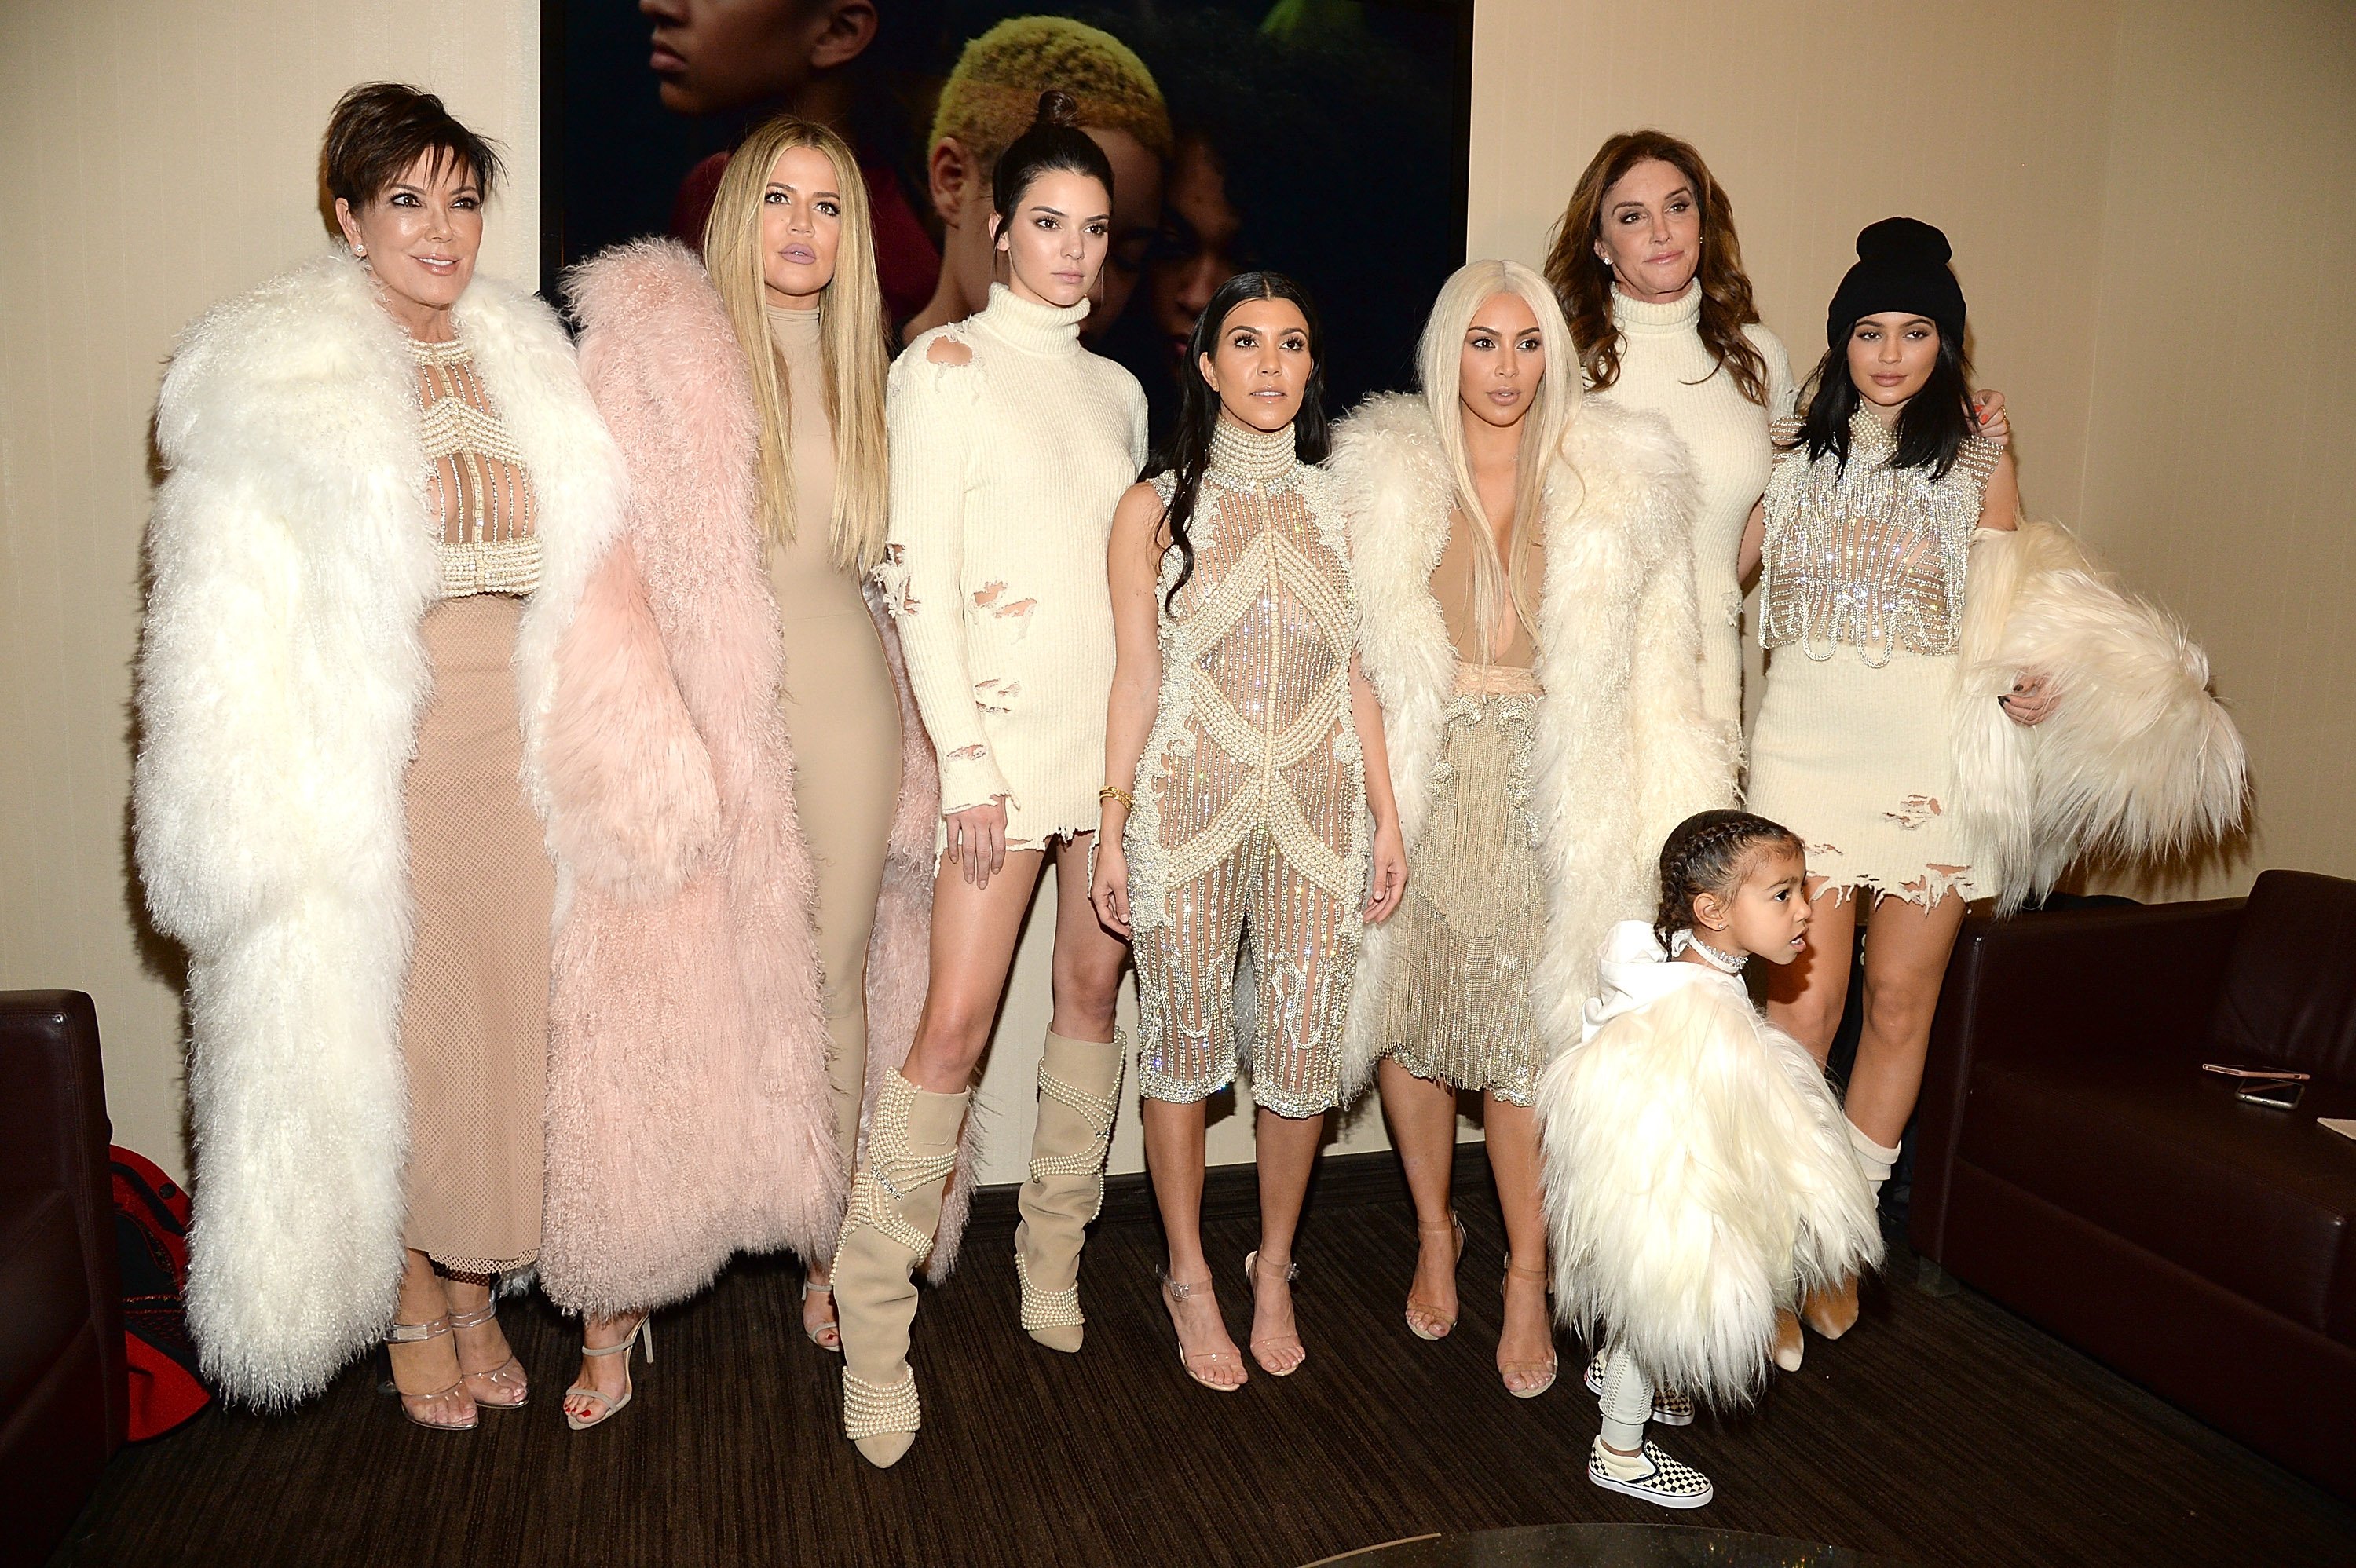 Khloe Kardashian, Kris Jenner, Kendall Jenner, Kourtney Kardashian, Kim Kardashian West, North West, Caitlyn Jenner and Kylie Jenner attend Kanye West "Yeezy" Season 3 on February 11, 2016, in New York City. | Source: Getty Images.